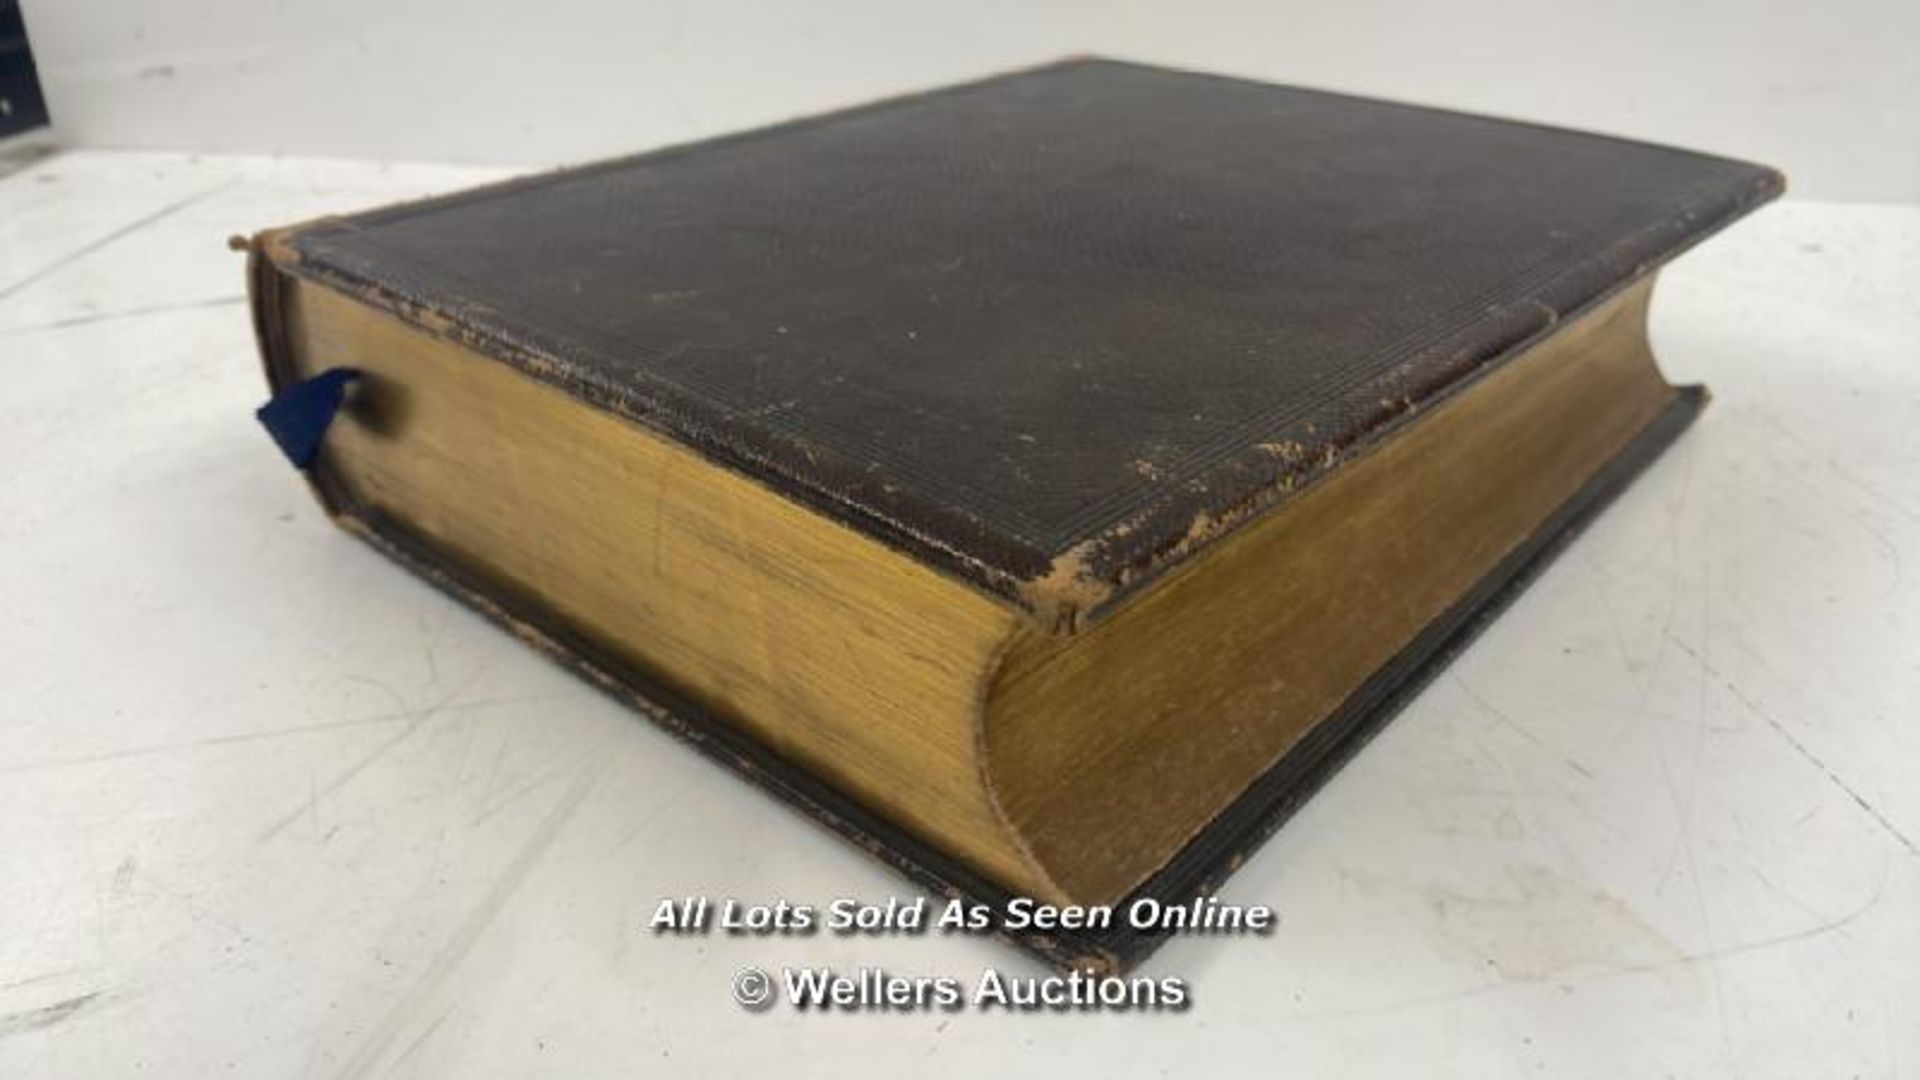 LARGE OXFORD UNIVERSITY PRESS HOLY BIBLE WITH HAND WRITTEN INSCRIPTION DATED 1853 - Image 2 of 5